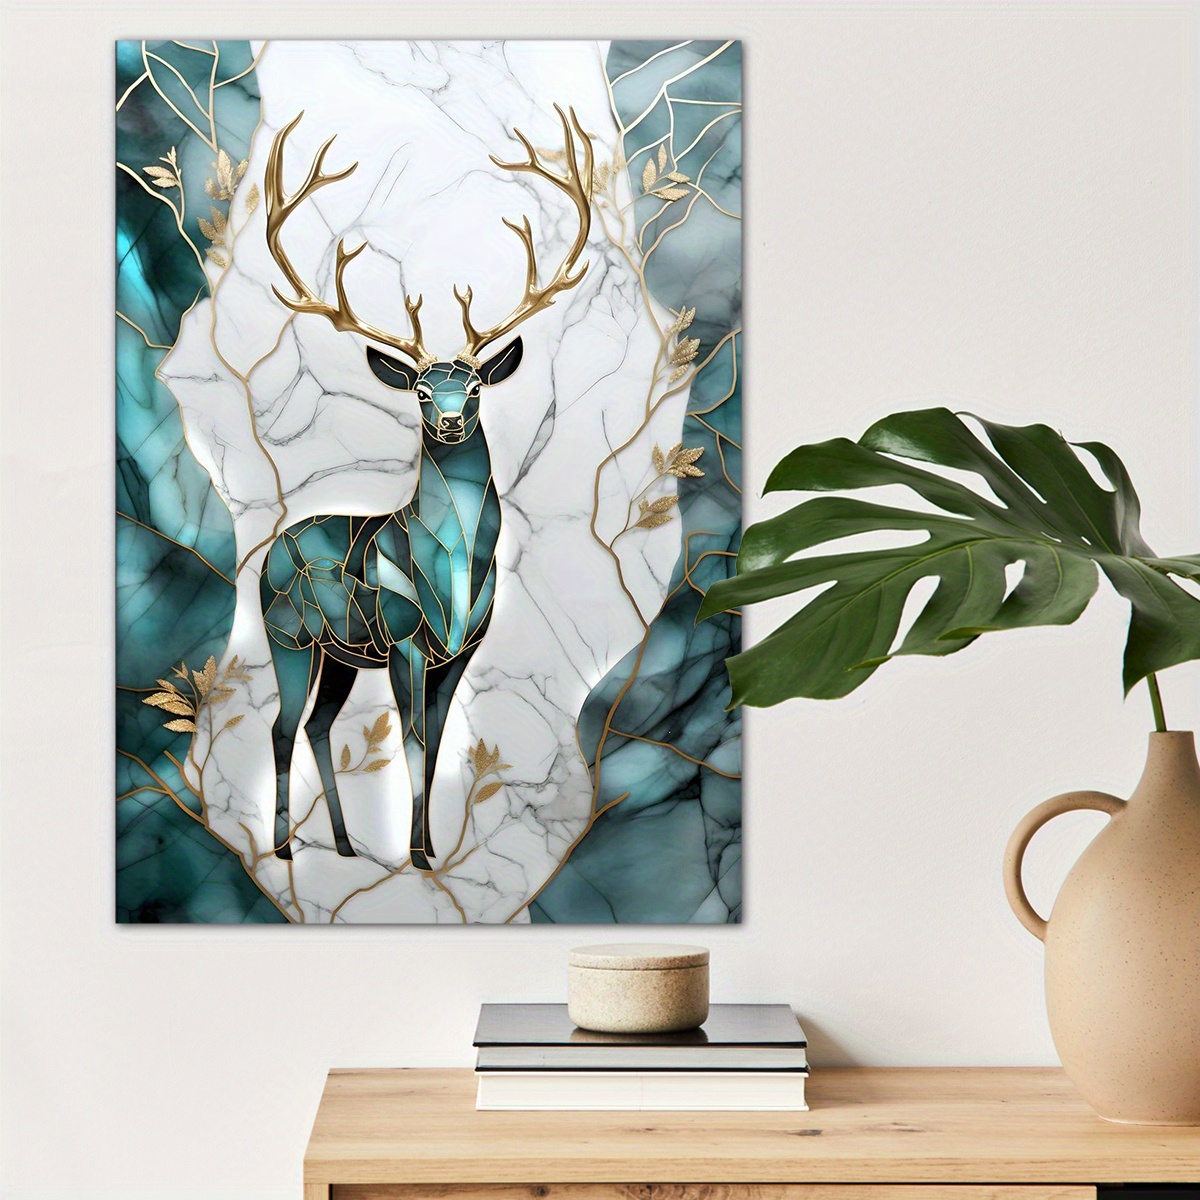 

1pc Deer Canvas Wall Art For Home Decor, Abstract Poster Wall Decor High Quality Canvas Prints For Living Room Bedroom Kitchen Office Cafe Decor, Perfect Gift And Decoration